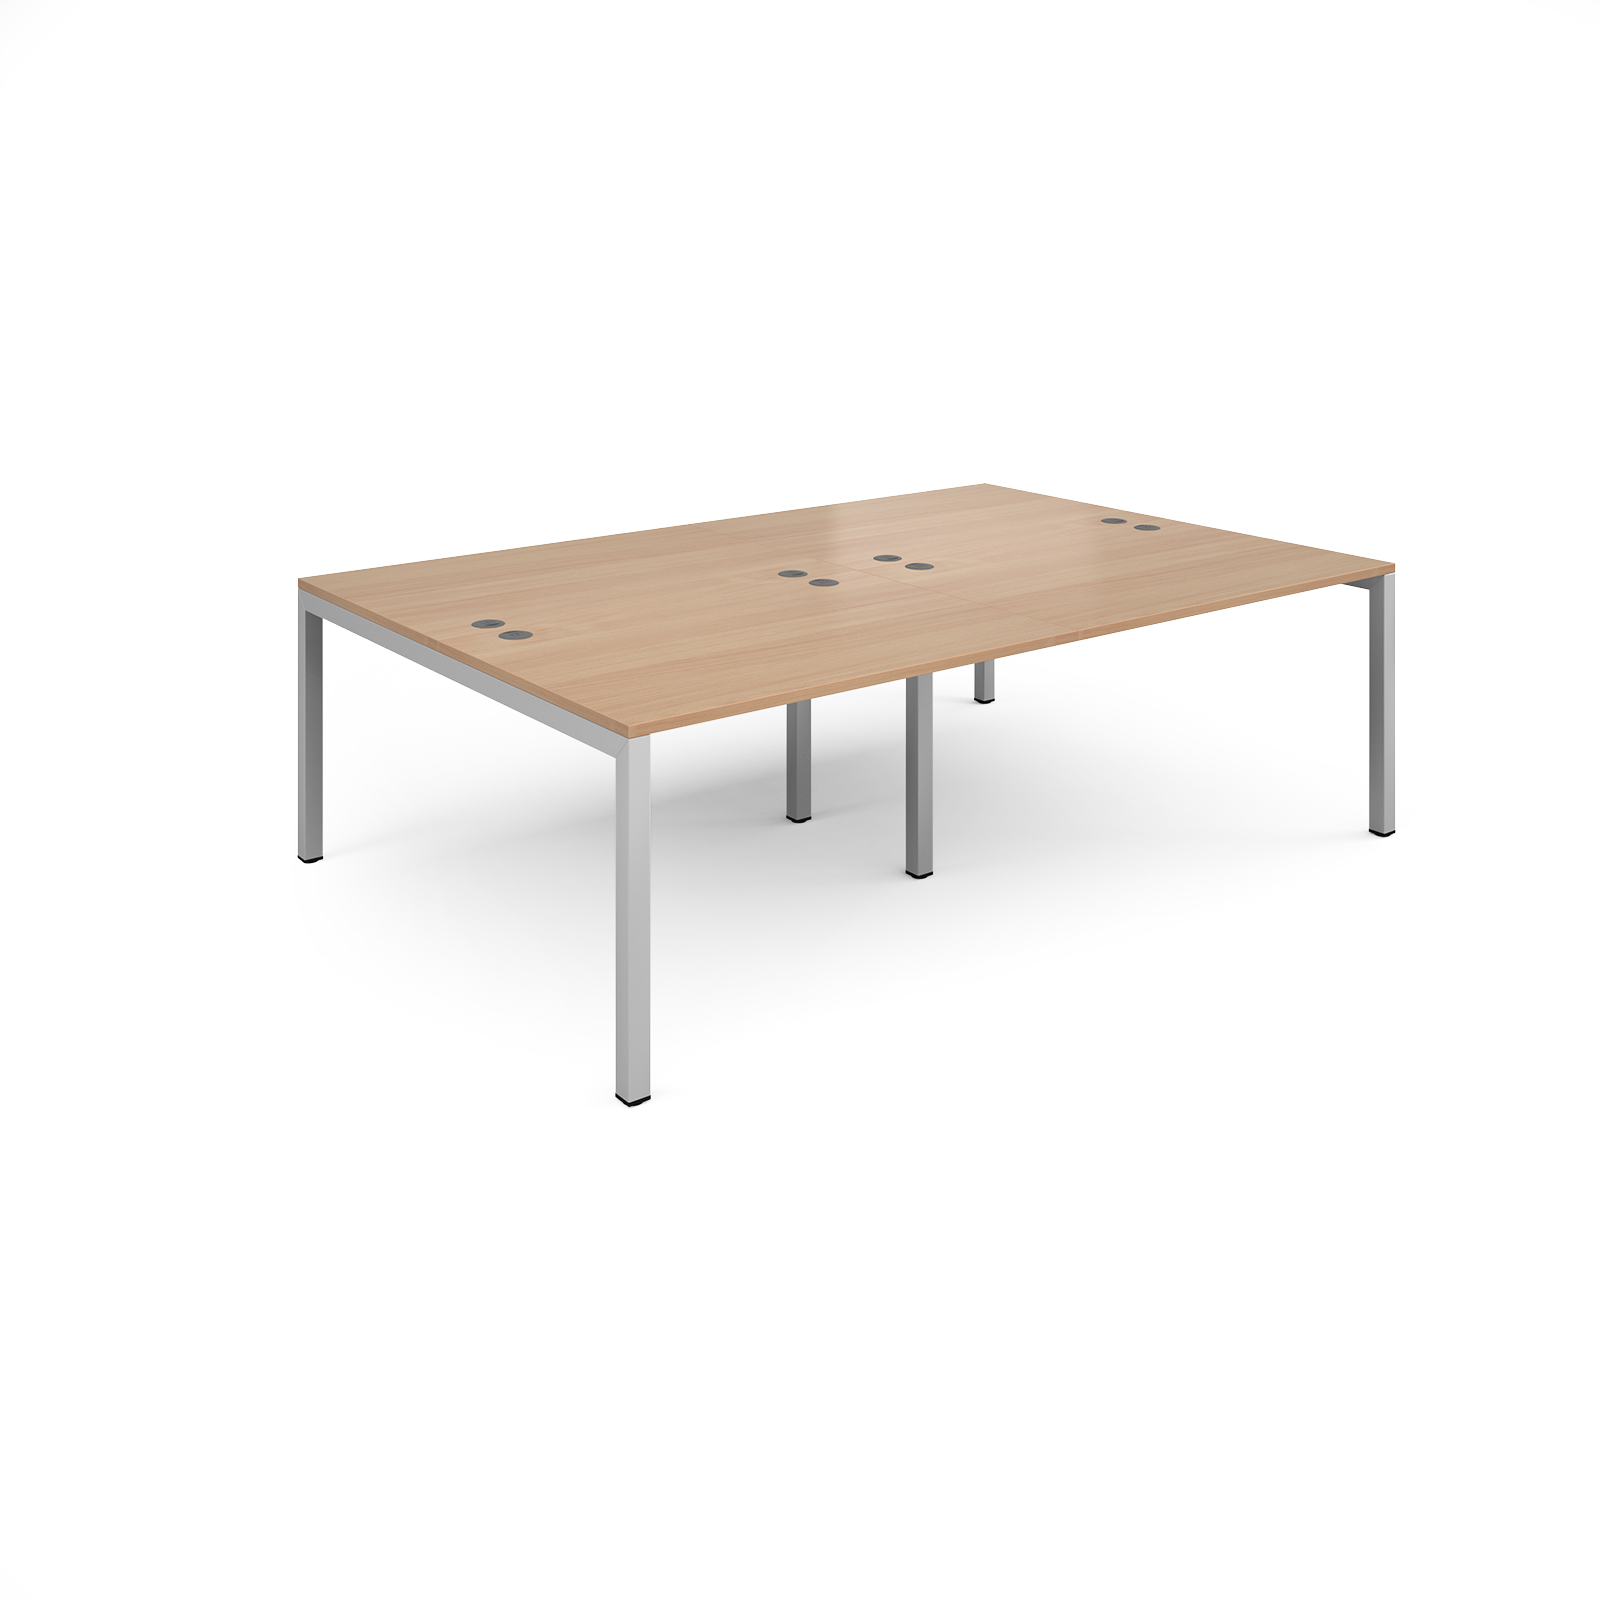 Connex double back to back desks 2400mm x 1600mm - silver frame, beech top